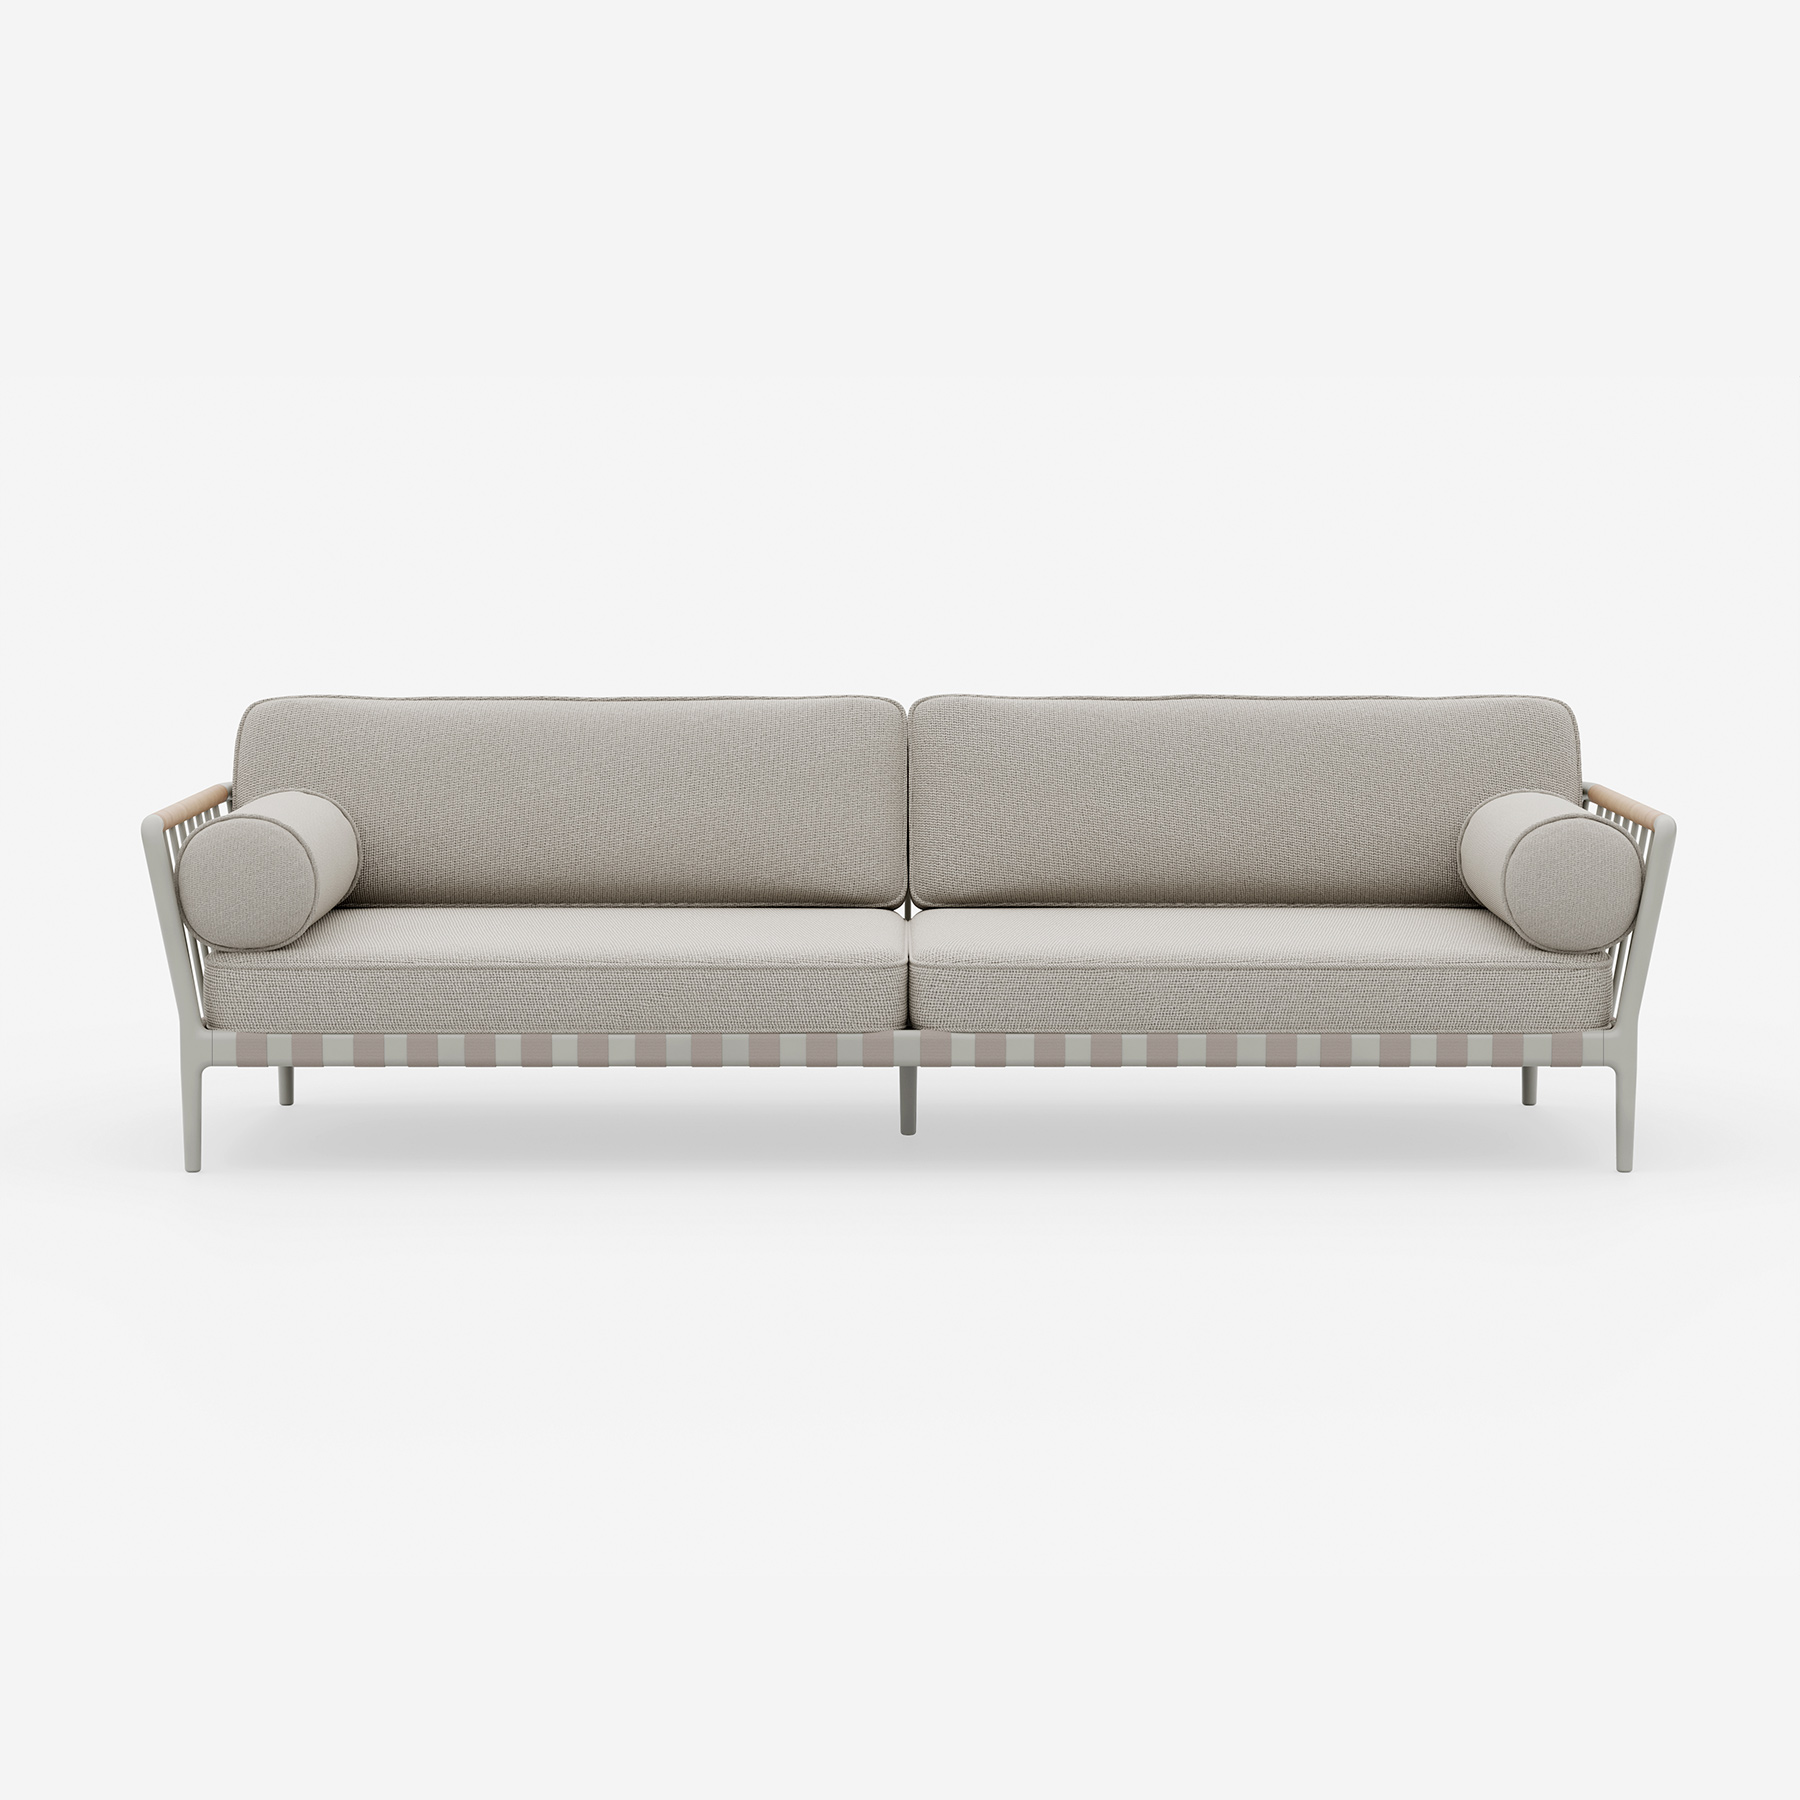 vipp-720-open-air-sofa-3seater-PROJECT VIPP